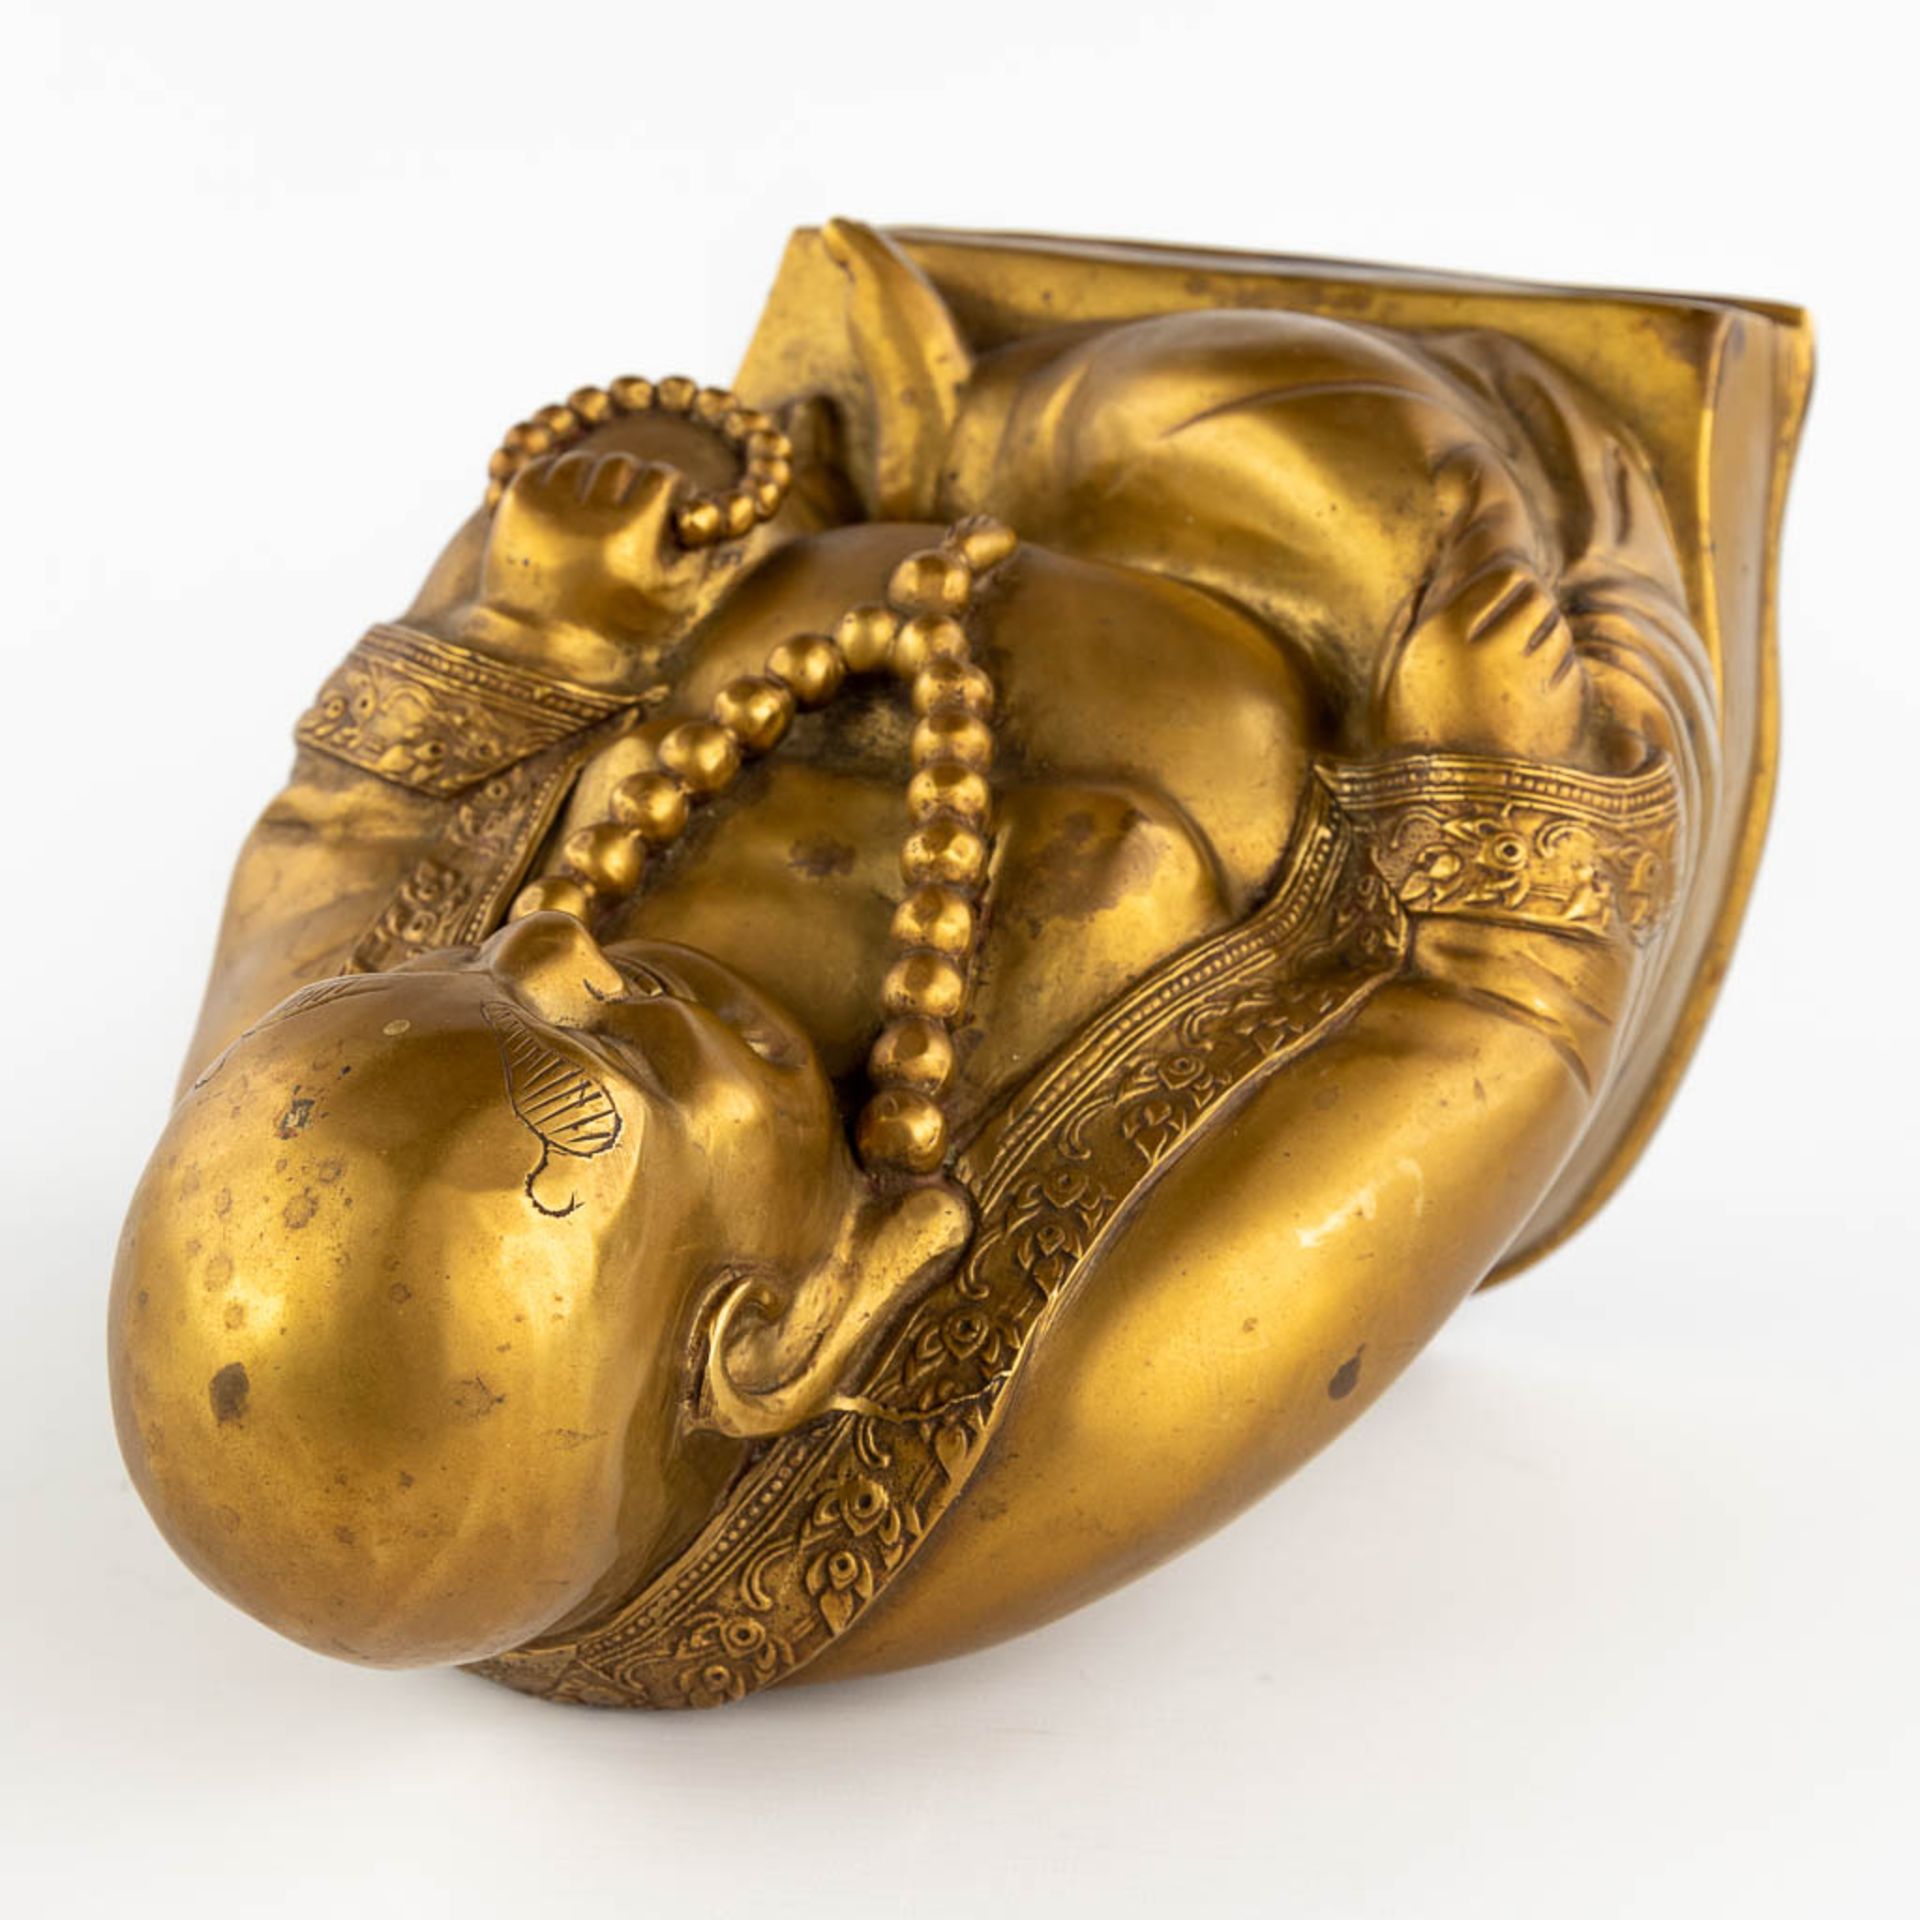 A Chinese laughing buddha, polished bronze. (L:27 x W:27 x H:34 cm) - Image 9 of 11